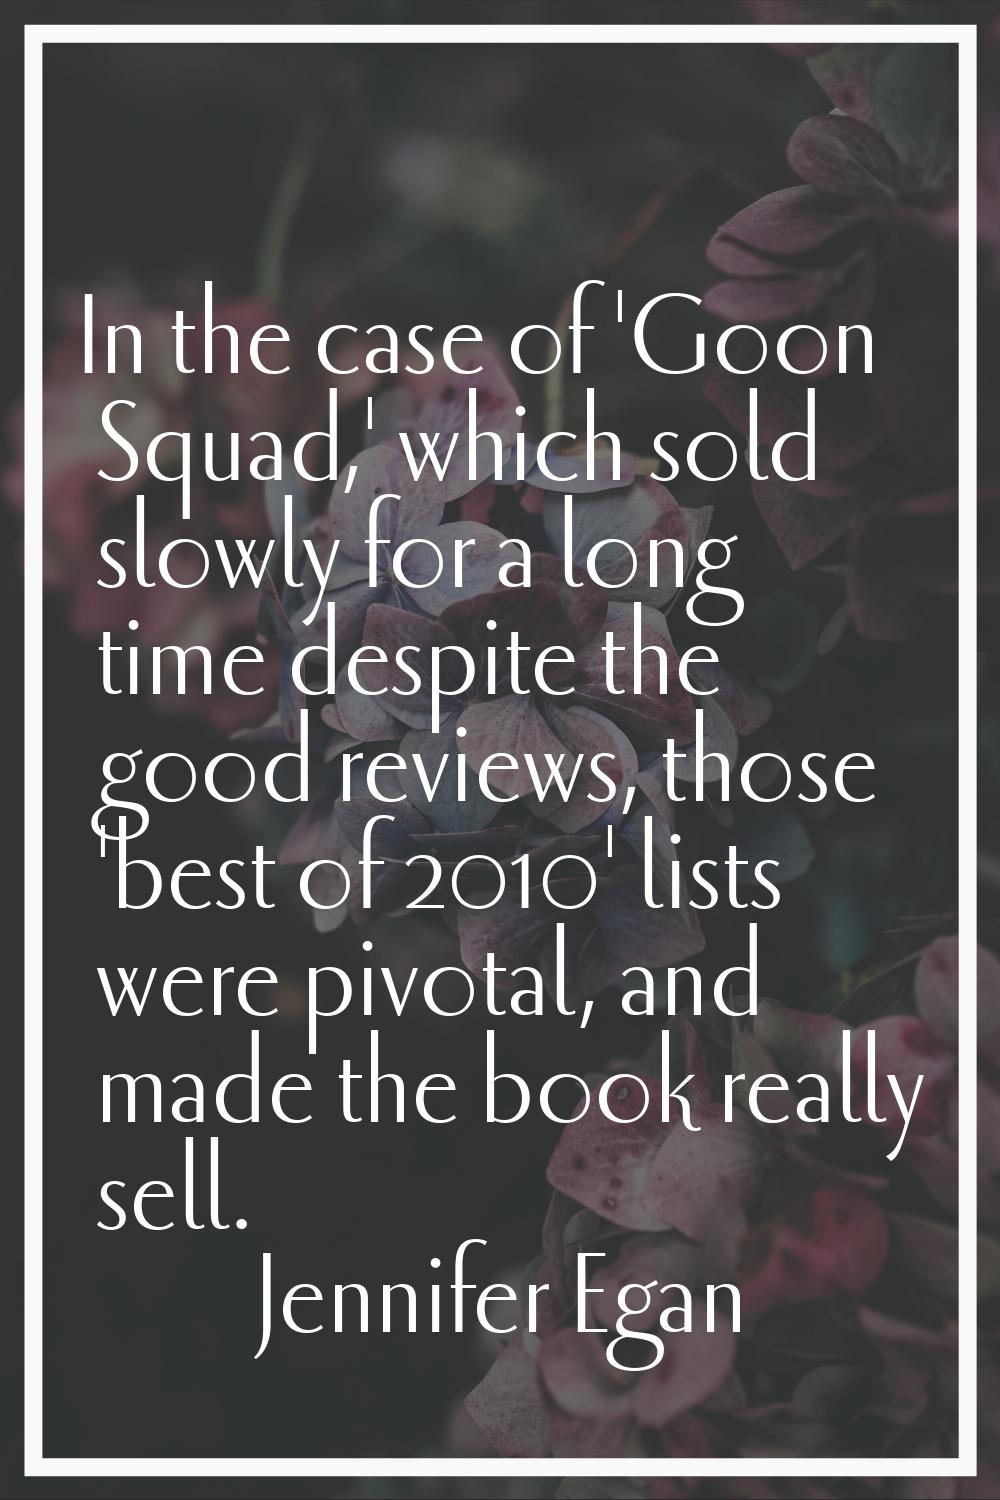 In the case of 'Goon Squad,' which sold slowly for a long time despite the good reviews, those 'bes